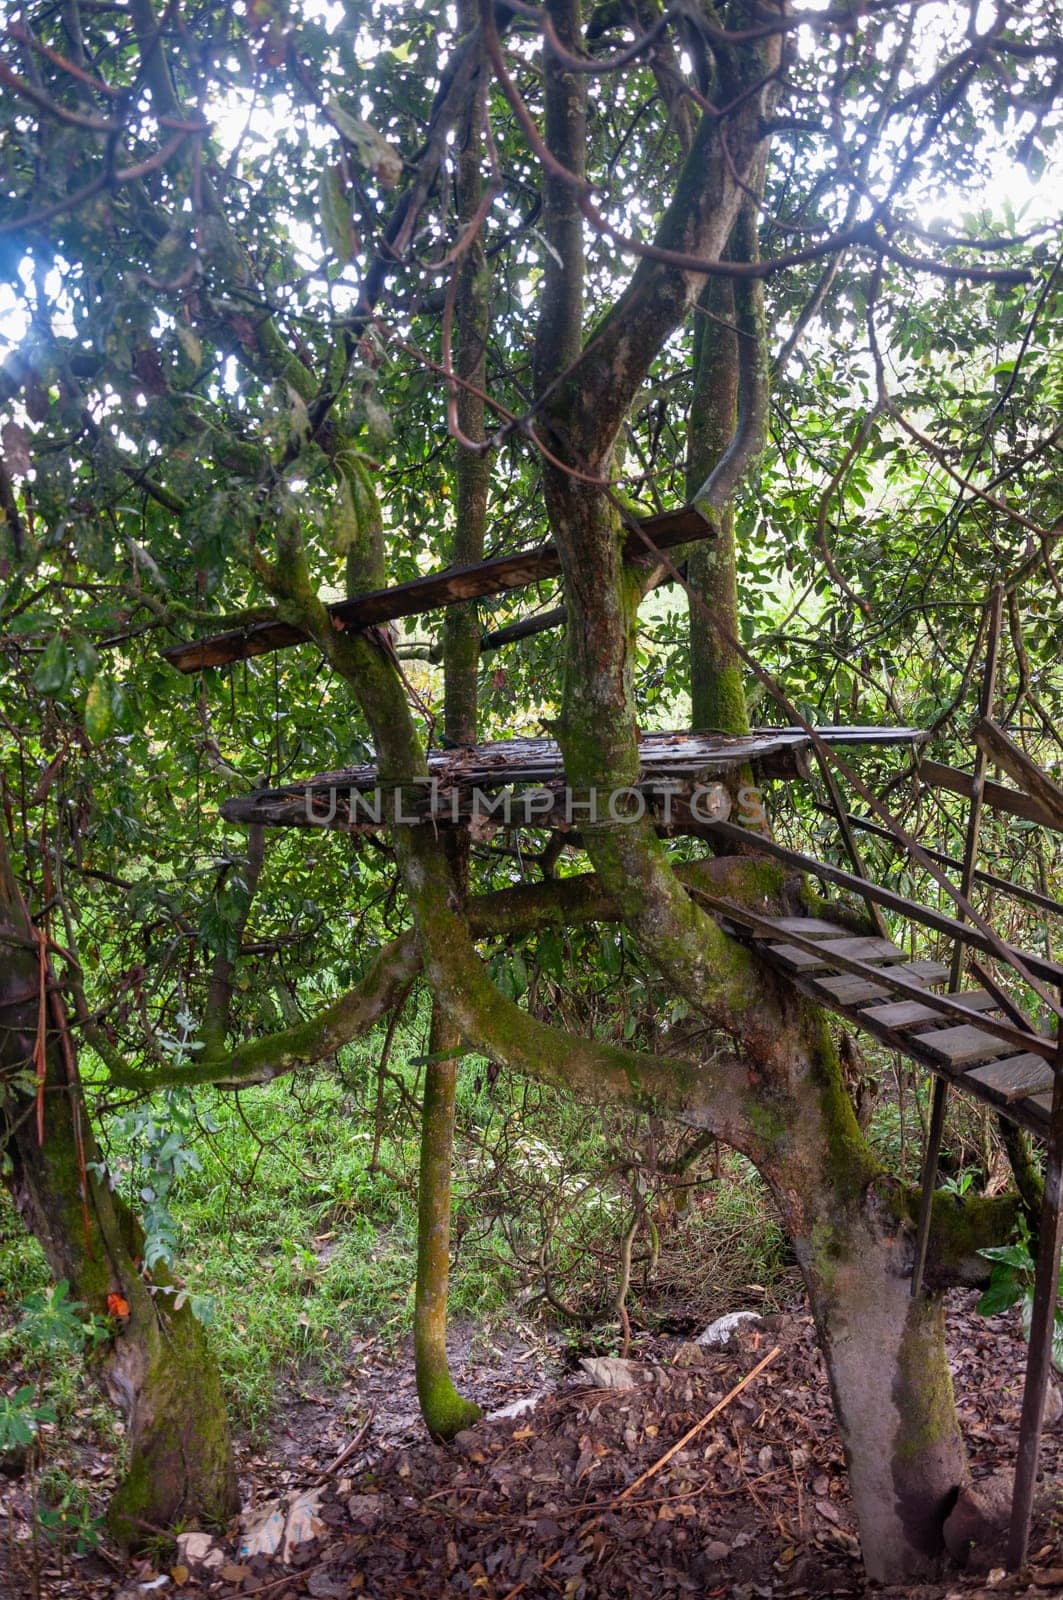 wooden platform on a tree for paramilitary soldiers in the jungle of ecuador. army day by Raulmartin